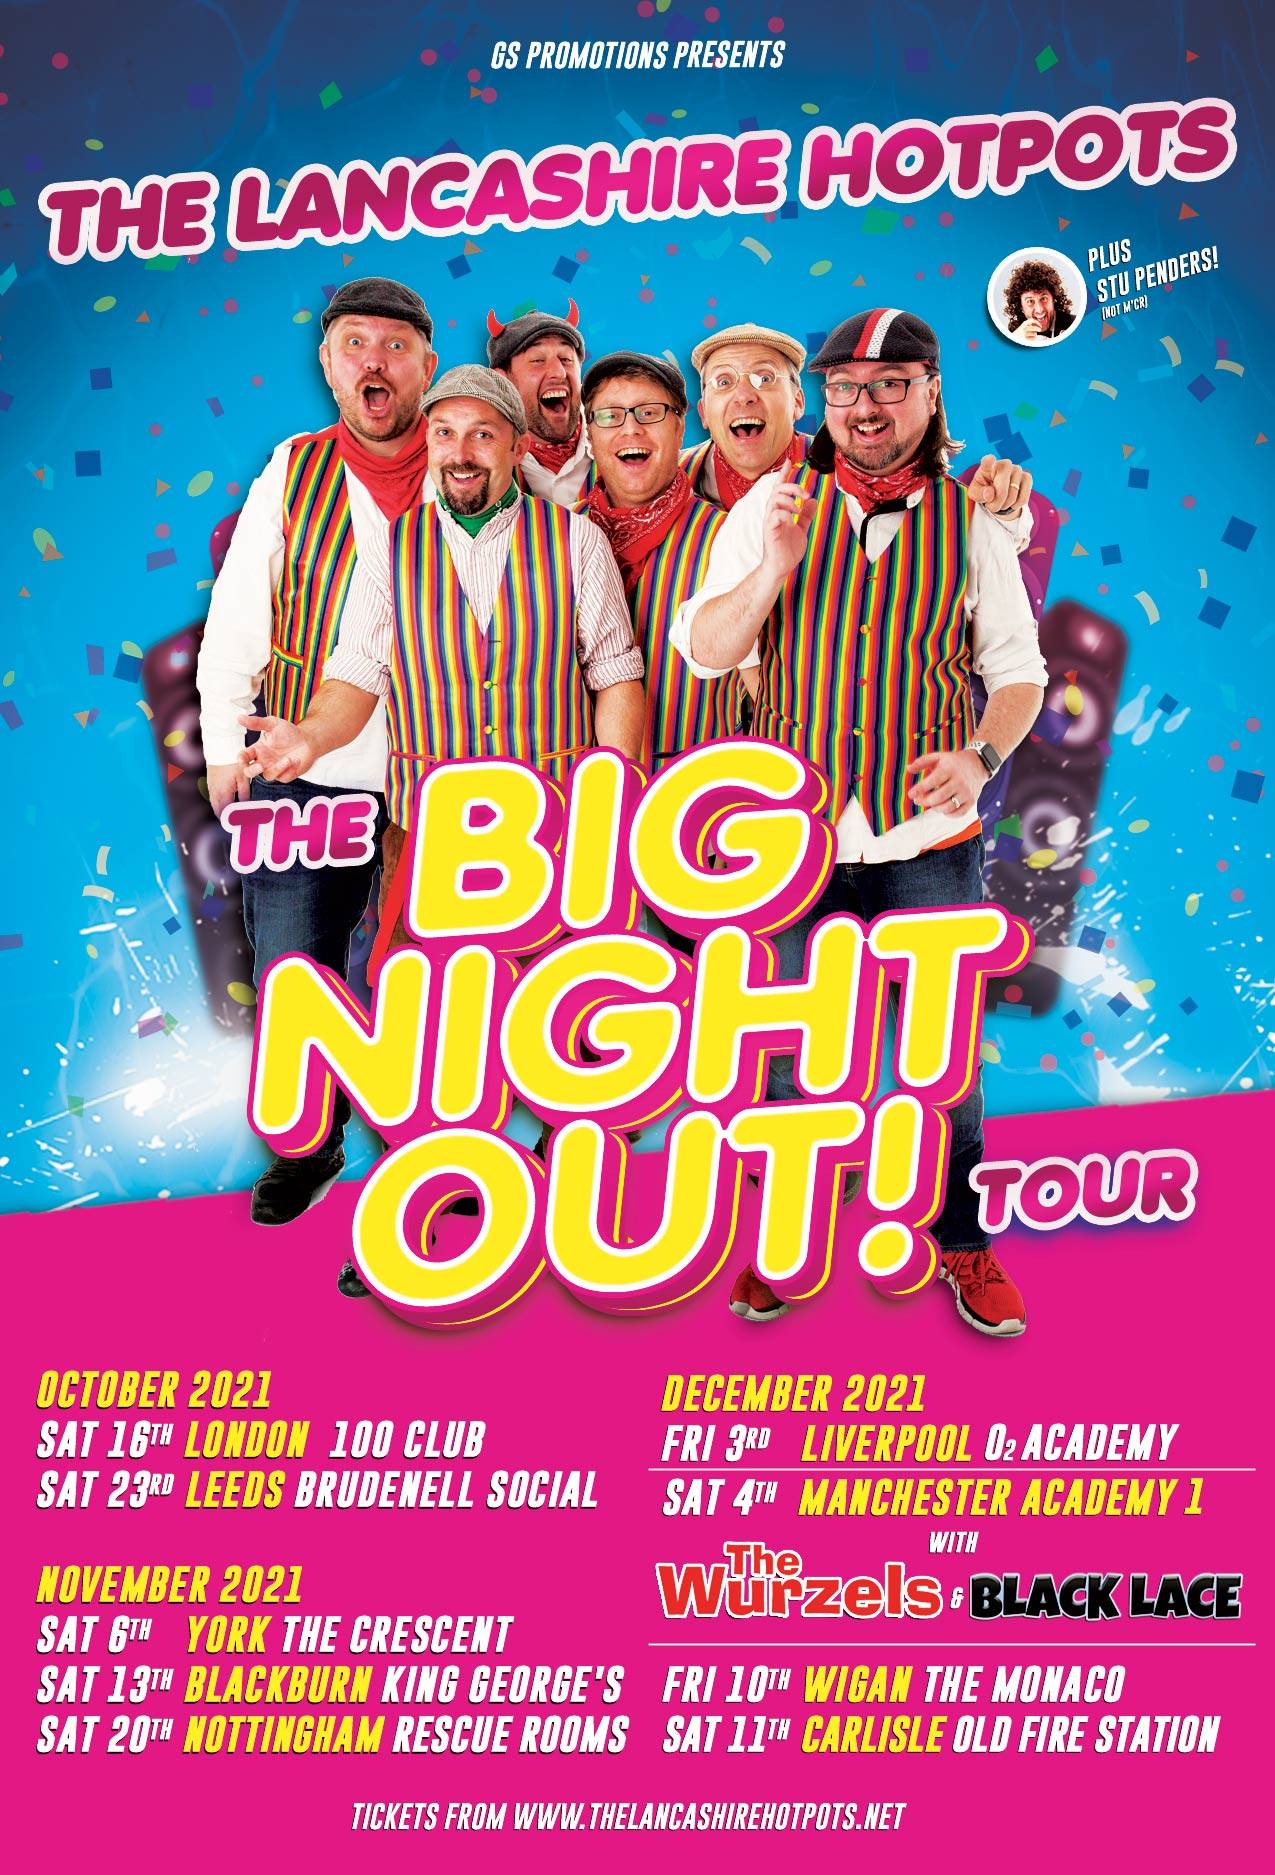 The Lancashire Hotpots Big Night Out tour promotional image